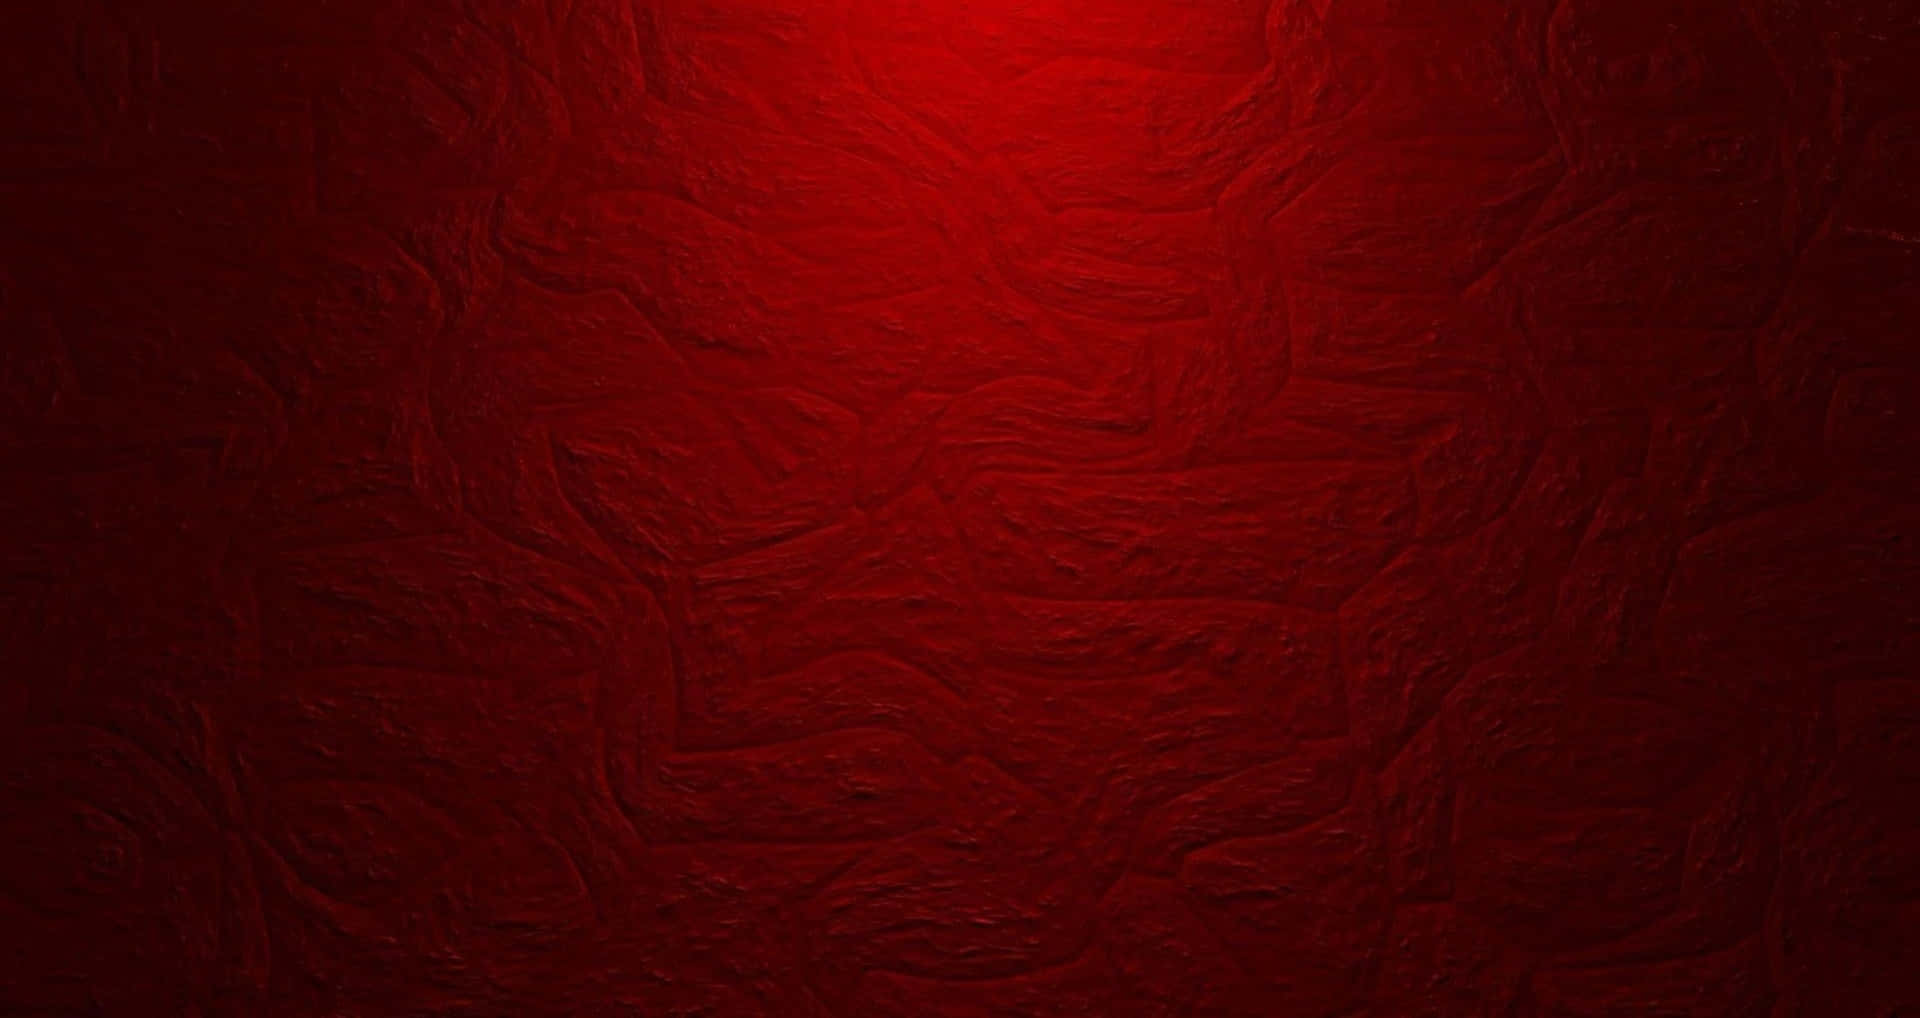 A Red Background With A Light Shining On It